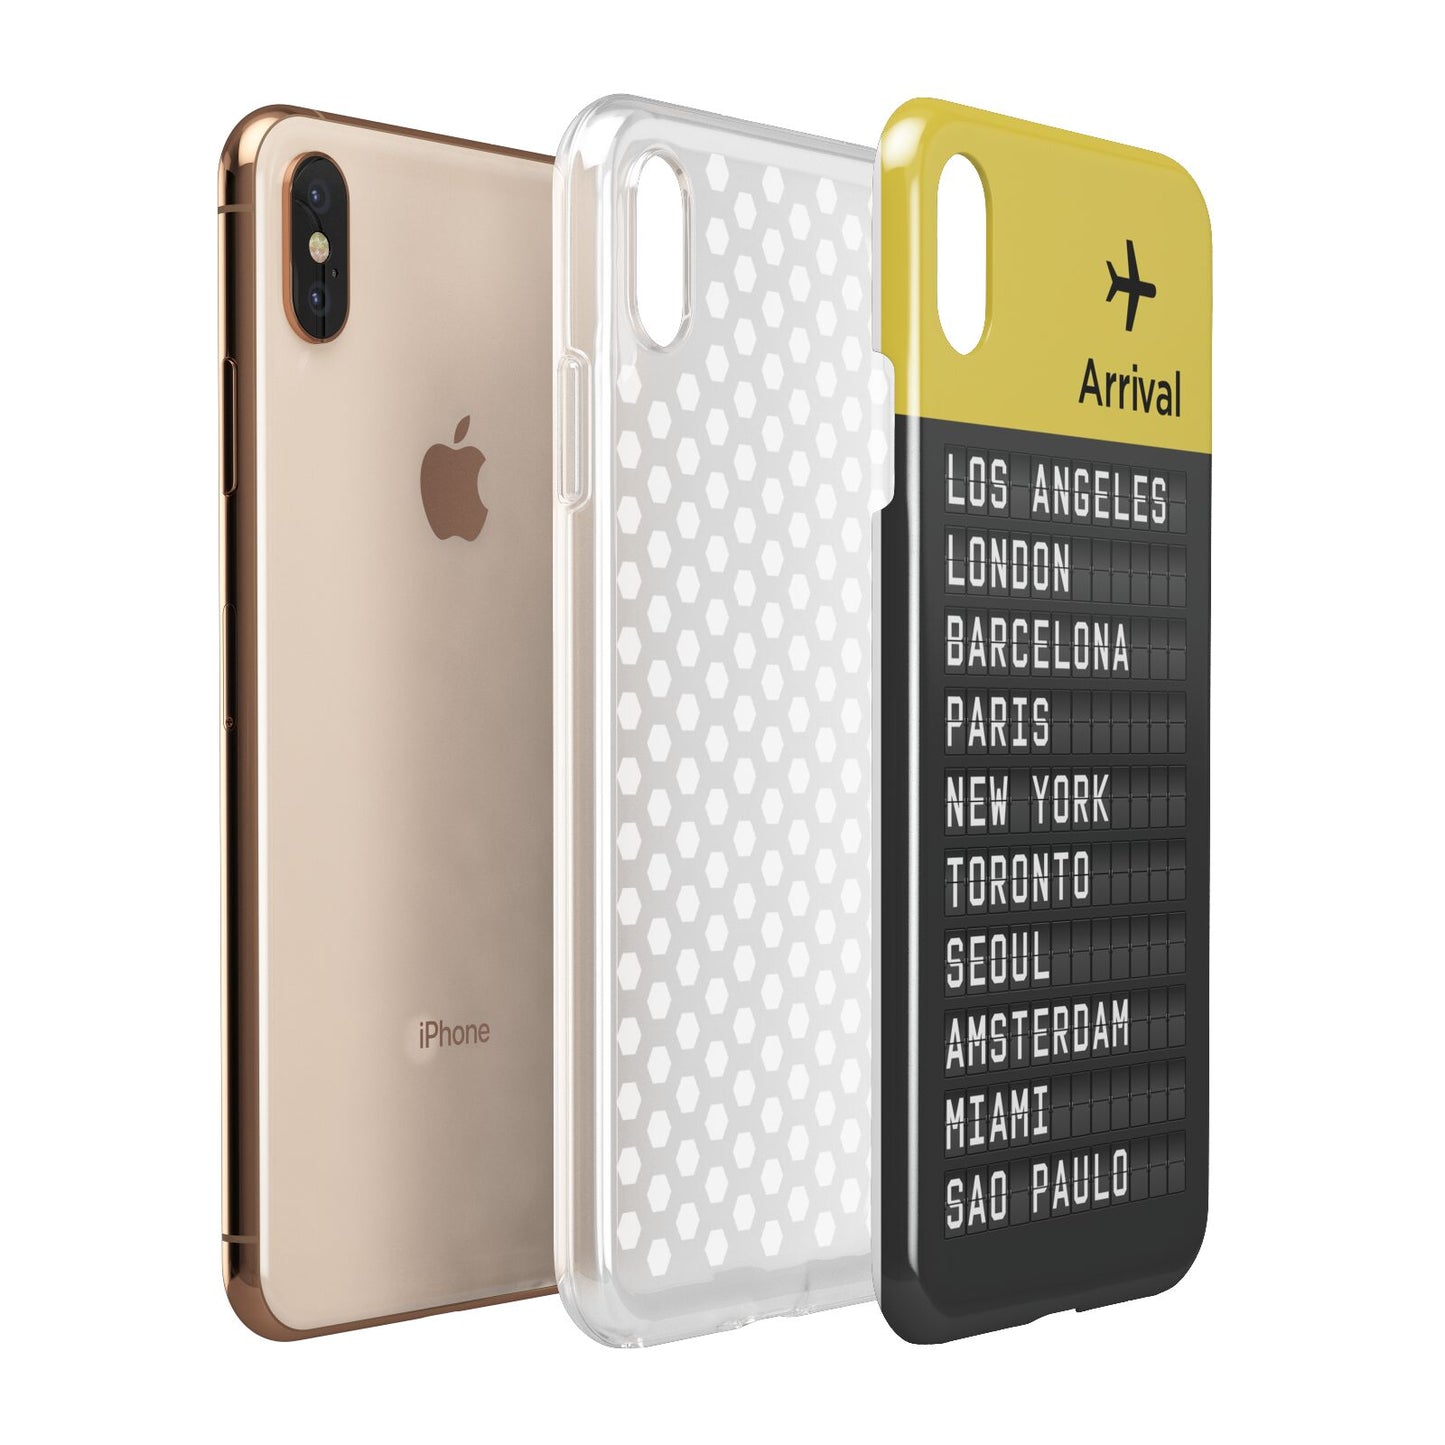 Airport Arrivals Board Apple iPhone Xs Max 3D Tough Case Expanded View